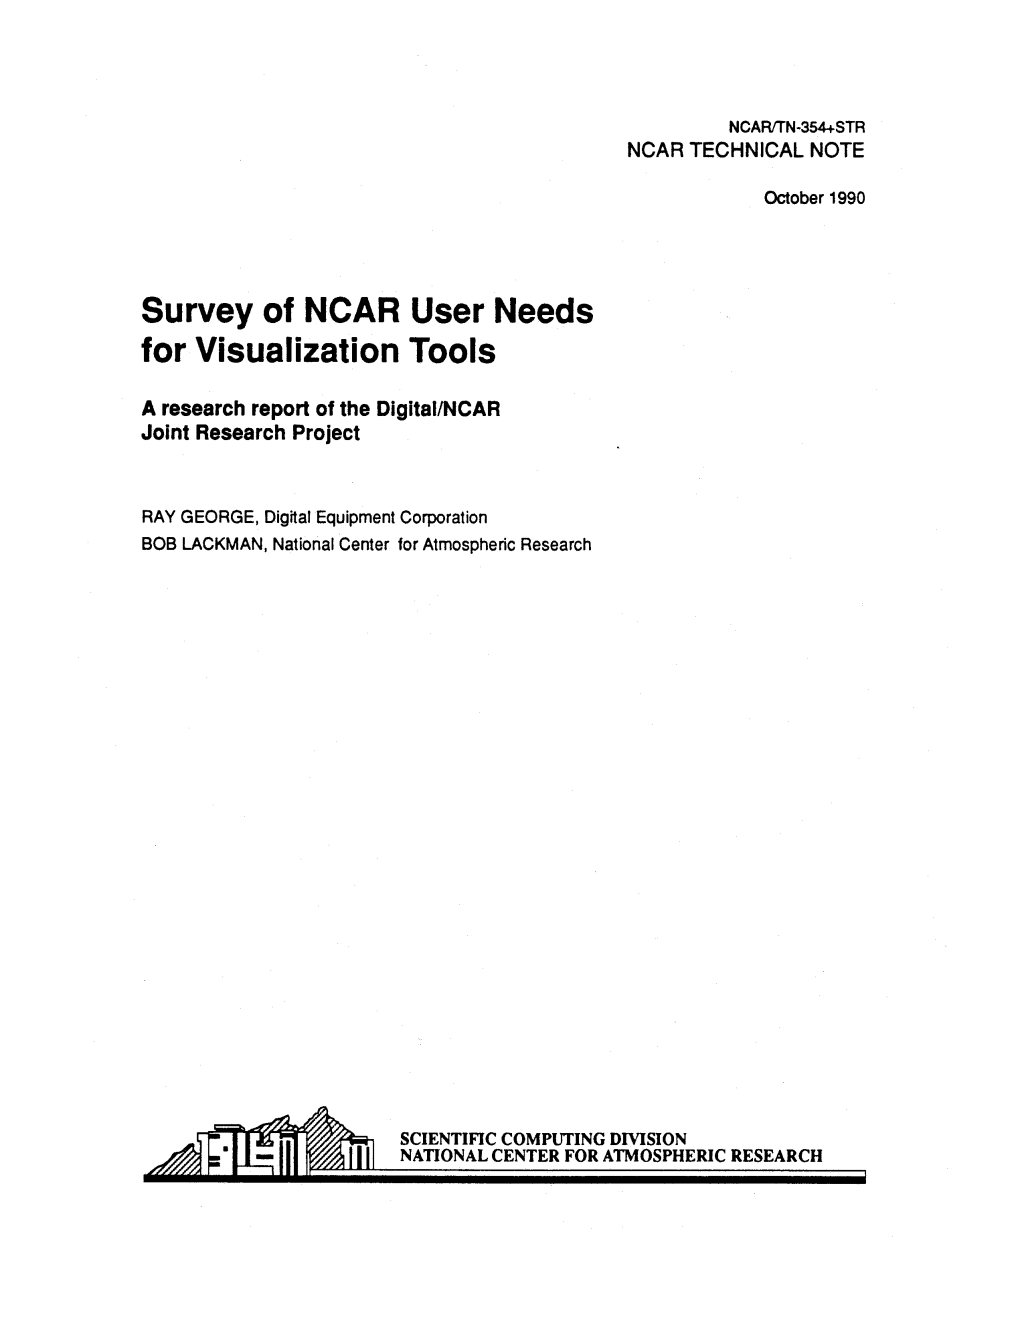 Survey of NCAR User Needs for Visualization Tools